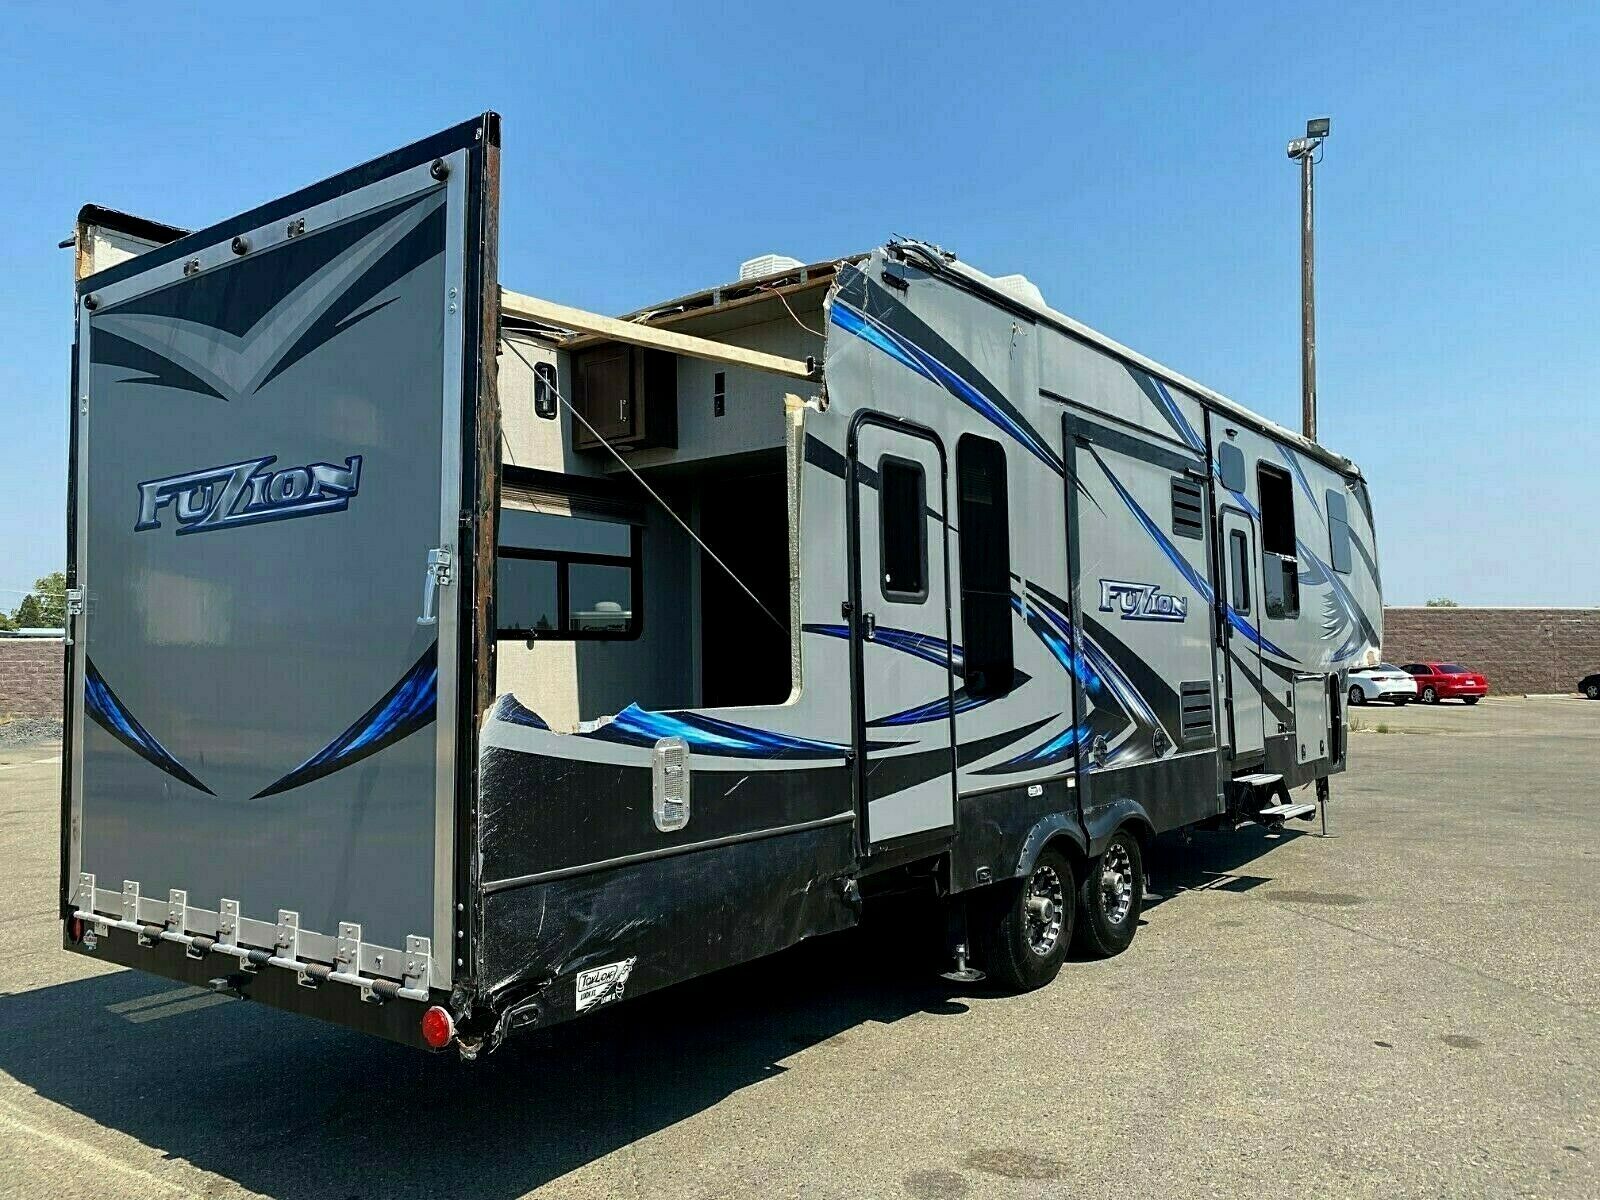 project travel trailers for sale